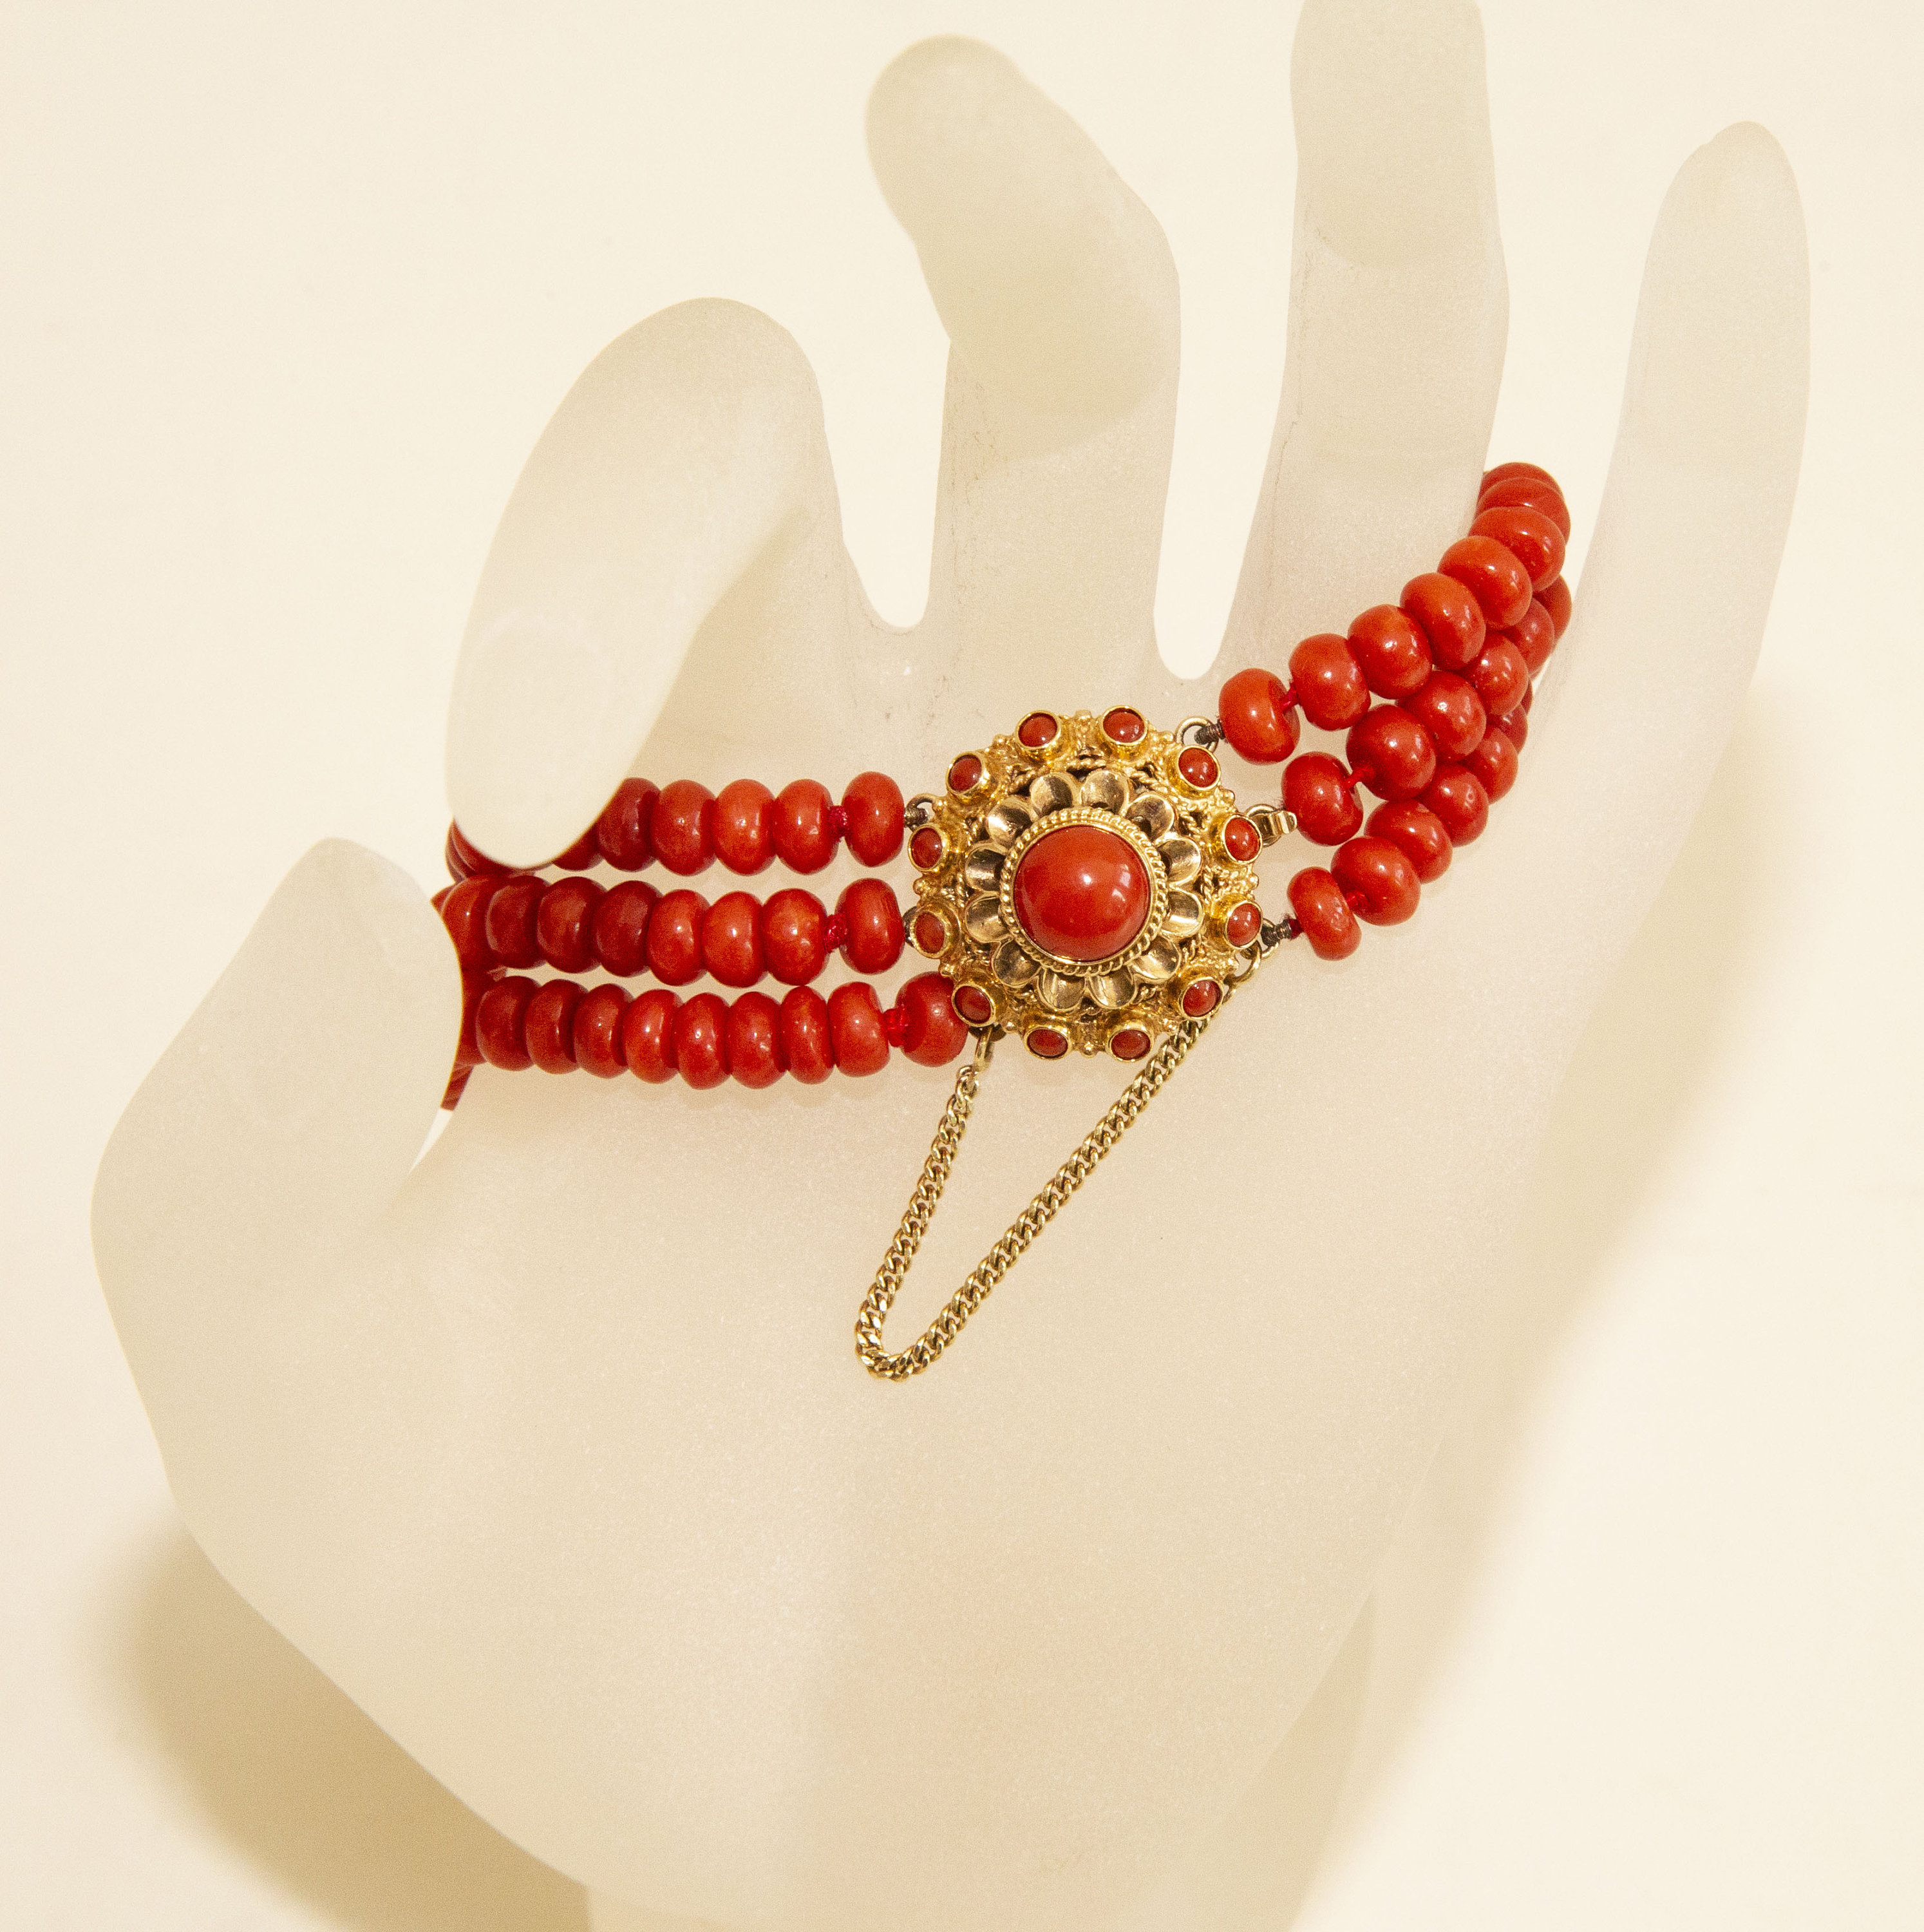 Georgian 18ct Gold & Coral Bracelet with Heart Drop in Original Case (374W)  | The Antique Jewellery Company